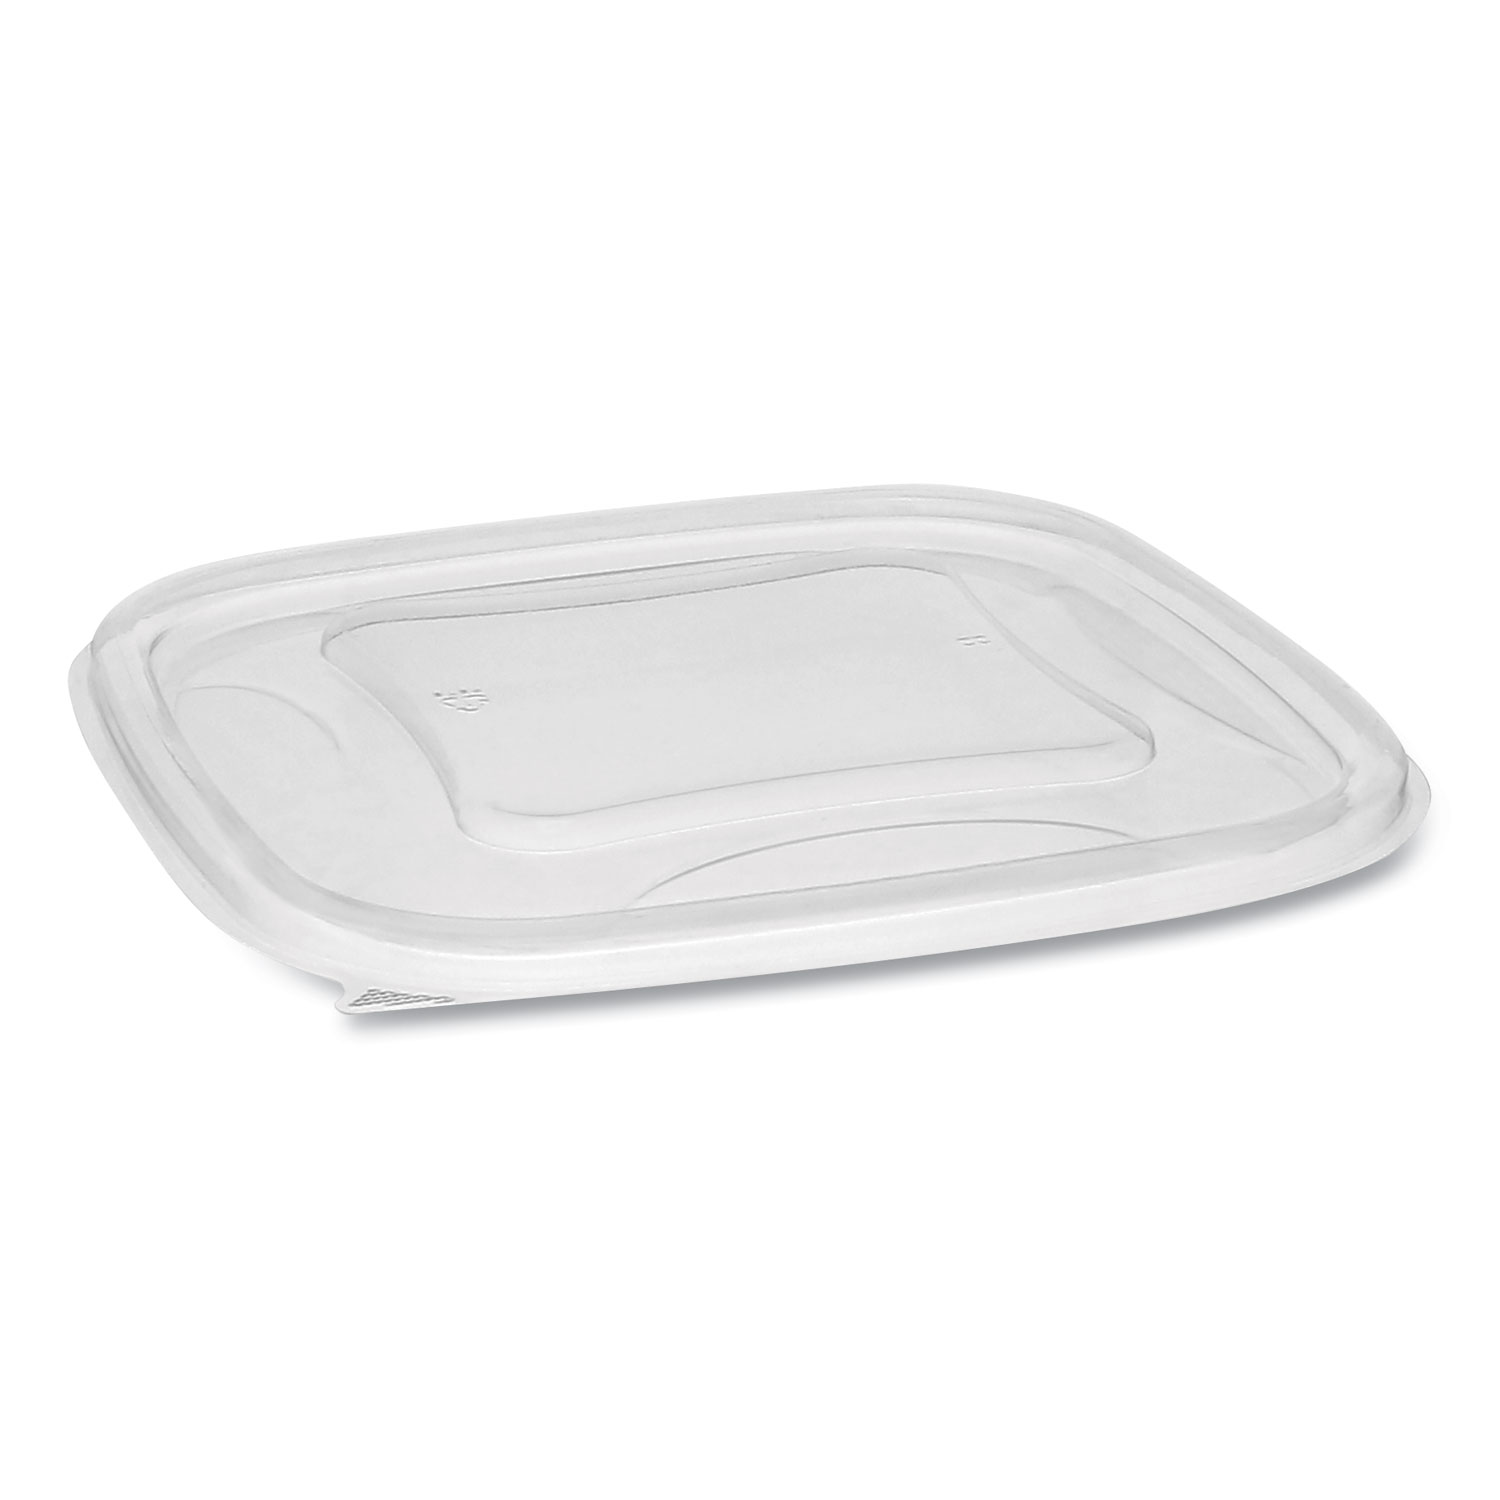  Pactiv SACLF07 EarthChoice Recycled Plastic Square Flat Lids, 7.38 x 7.38 x 0.26, Clear, 300/Carton (PCTSACLF07) 